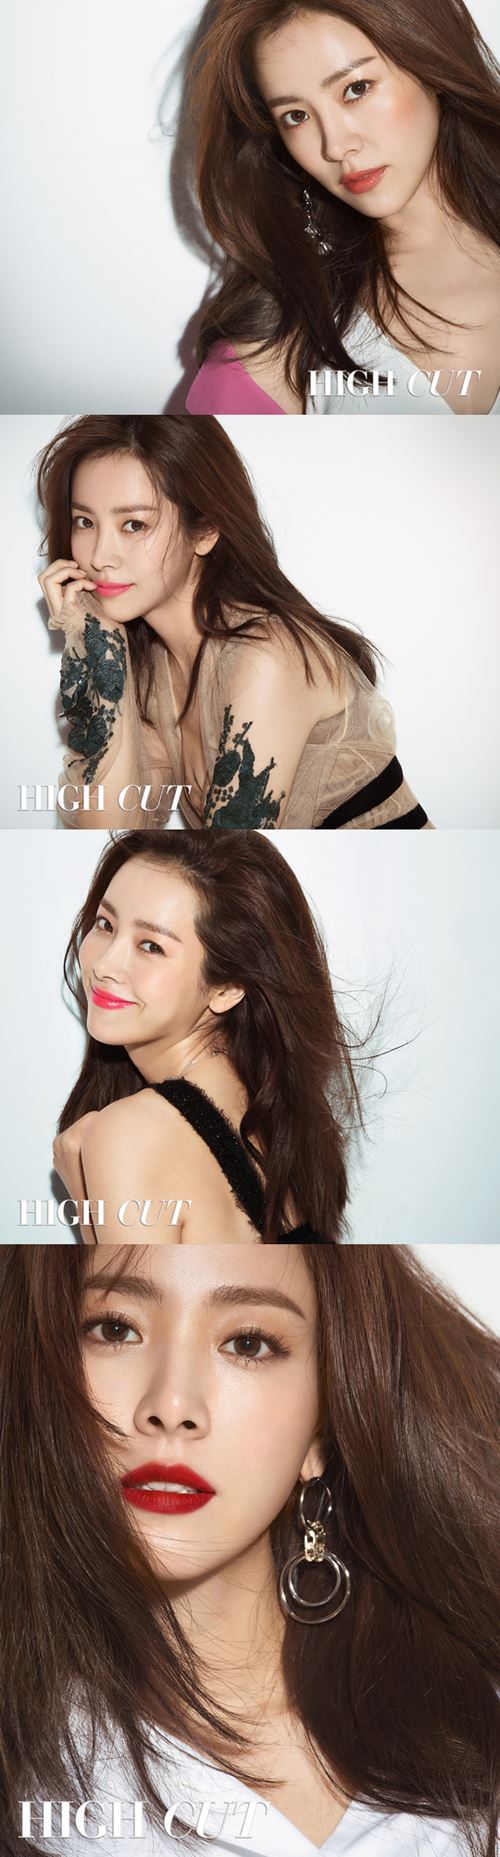 Actor Han Ji-min has revealed the behind-the-scenes story of TVN Drama Knowing Wife.Han Ji-min showed a lovely charm and a deadly figure at the same time through the star style magazine Hycutt which is published on the 6th.The beauty of the flawless beauty, which was not shaken by any expression or angle, caught the sight. The white skin and the clear features were beauty itself.Each cut perfectly digests a variety of lipstick colors and proves what beauty queen is.Han Ji-min, who was interviewed with the picture, said about his wifes acting in the first episode of TVN Drama Knowing Wife, I wanted to look like a real baby mother.Stylist Han Hye-yeon told Sister, I want you to prepare clothes that you wear instead of pretty clothes.All of the pajama pants and T-shirts that I wore were worn by (Han Hye-yeon) Sisters at home by rubber bands, he said.Also, about the intelligence that breathes as her husband Cha Ju-hyeok, He is an angel. A positive fairy. He is big as your eyes.I feel like I just see Aron at the shooting site. I threw Wing it at each other from the first shot, but I do not know how well it fits. The director also admired it, saying, How well are you two fit?If I suddenly lie down, you will follow me and receive the ambassador. So I can throw Wing it comfortably, so the bishop does not cut when we play. He also mentioned the newly released film Miss Back, which he said Finally opens in mid-October.Im going to show you an extraordinary and strong performance, but I think the knowing wife has let go of the middle leg well.Izzy One director of Miss Back saw me yelling in the Knowing Wife trailer and said, What if you show me everything there?I should show it for the first time in our work. On the other hand, Han Ji-mins picture can be seen through Hycutt 227 published on the 6th.Photos  Hycutt